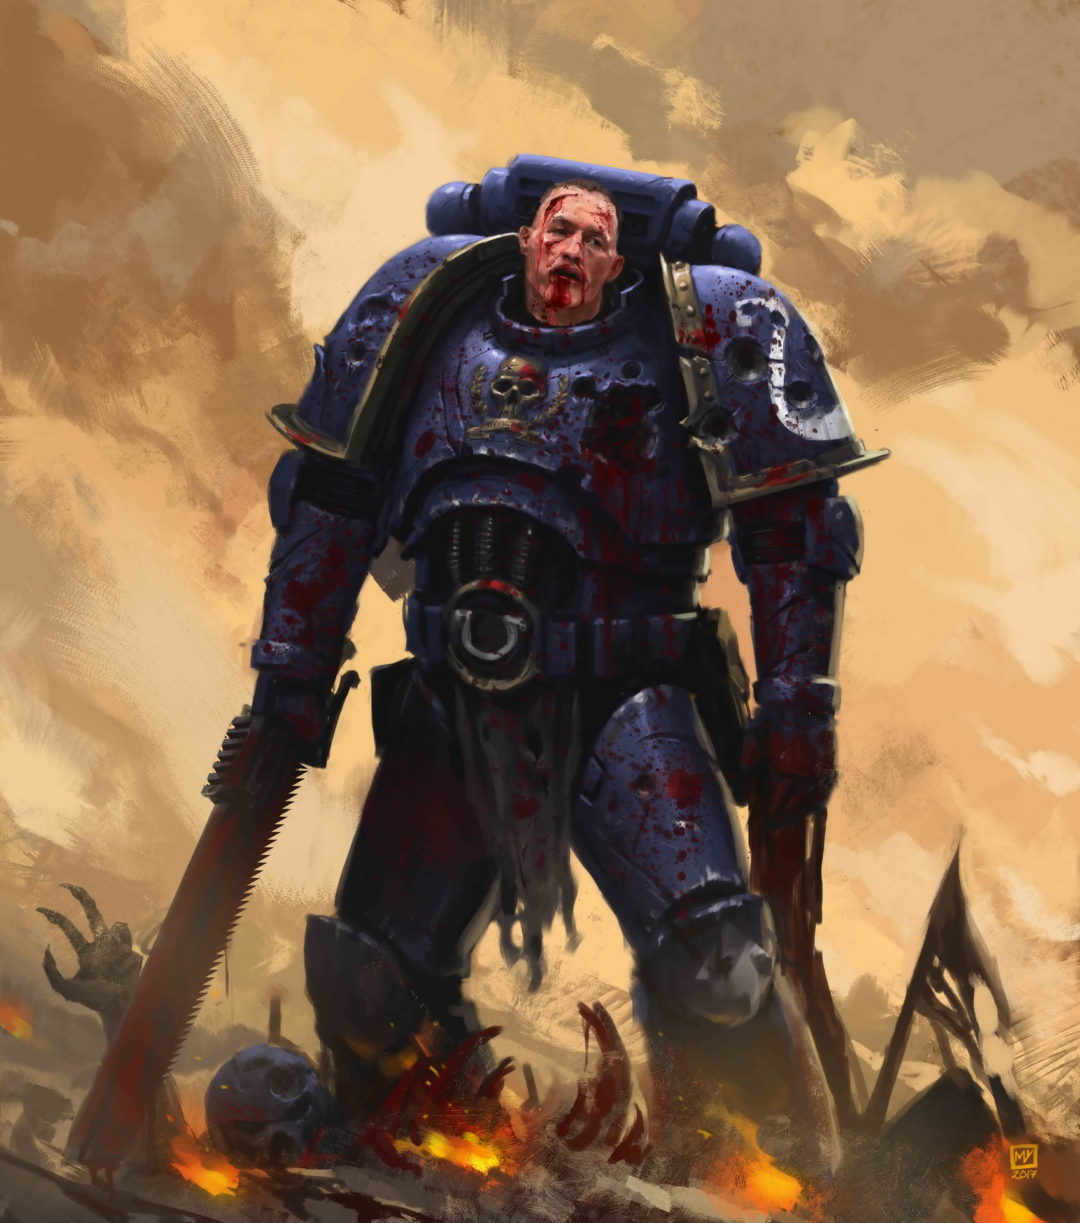 Space Marine after battle